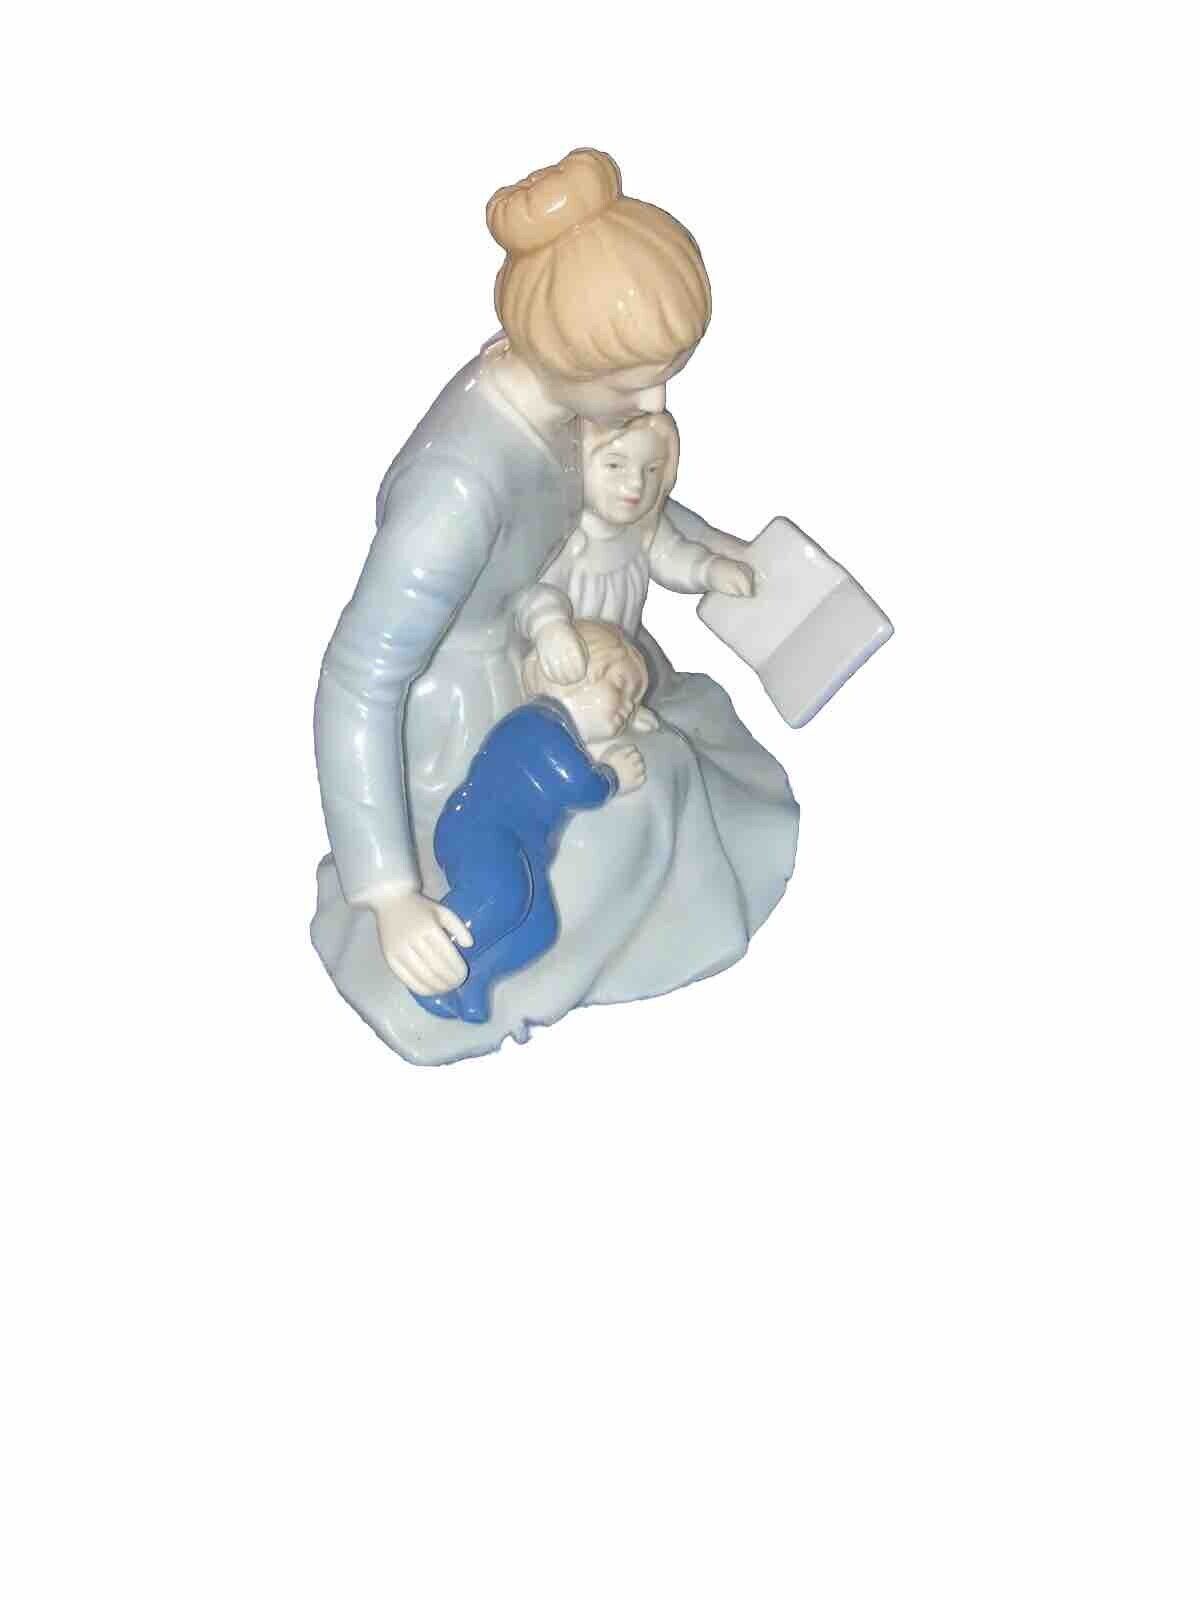  Avon  A MOTHER'S TOUCH   Porcelain Figurine  -  Beautiful Piece In Box